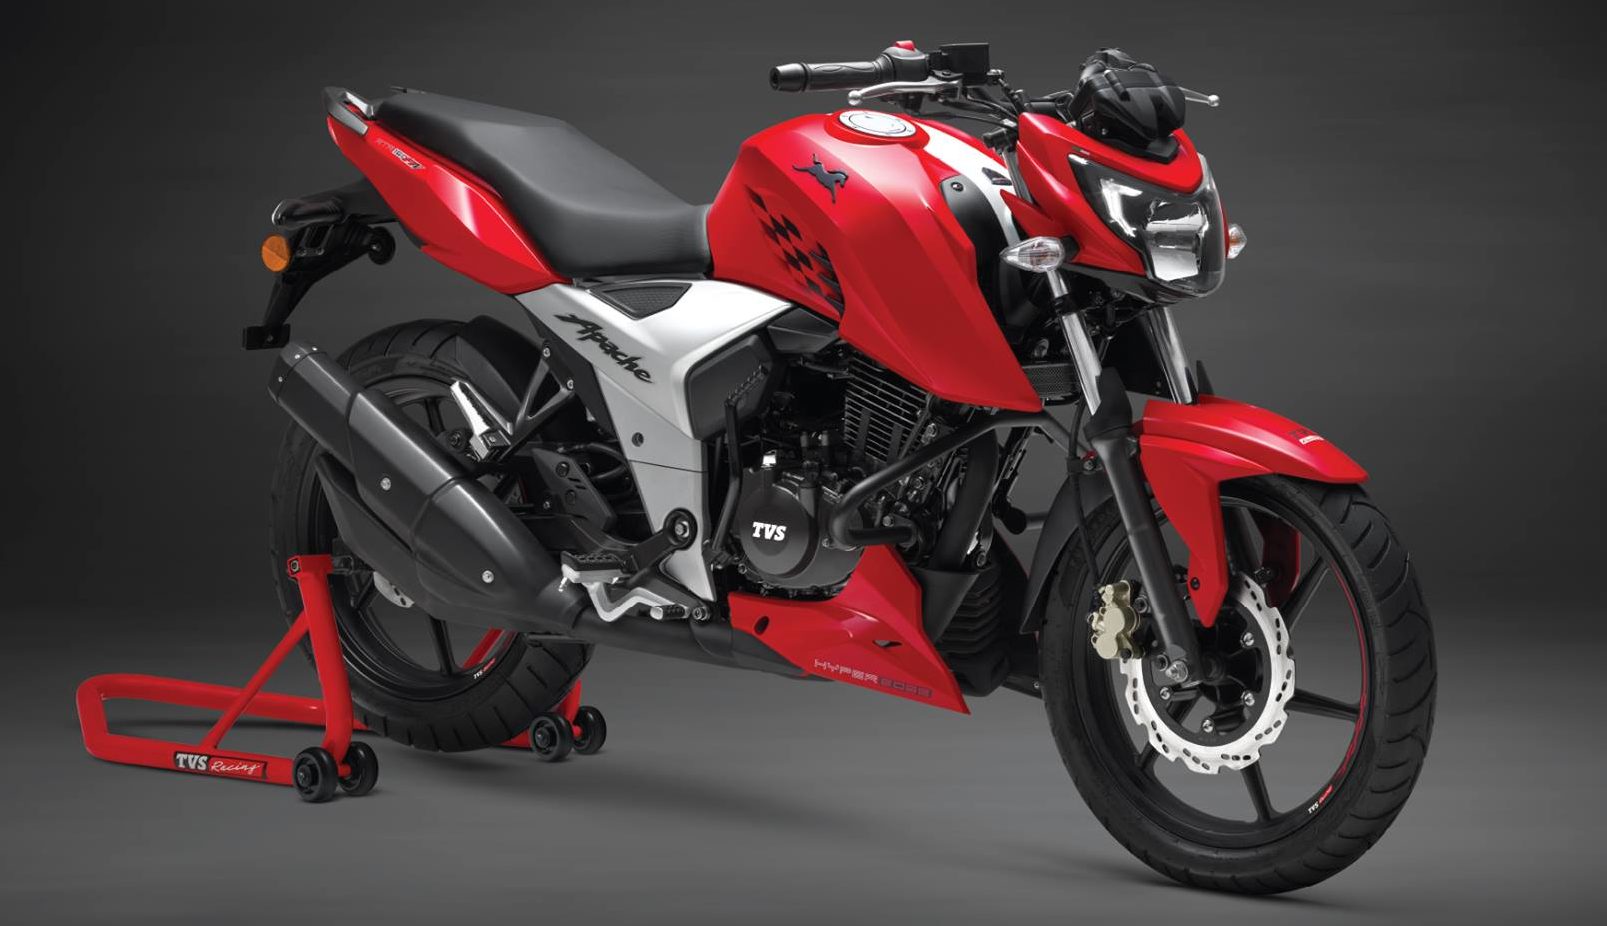 Official New Tvs Apache Rtr 160 Launched In India Prices Start At Inr 81 490 Motoroids